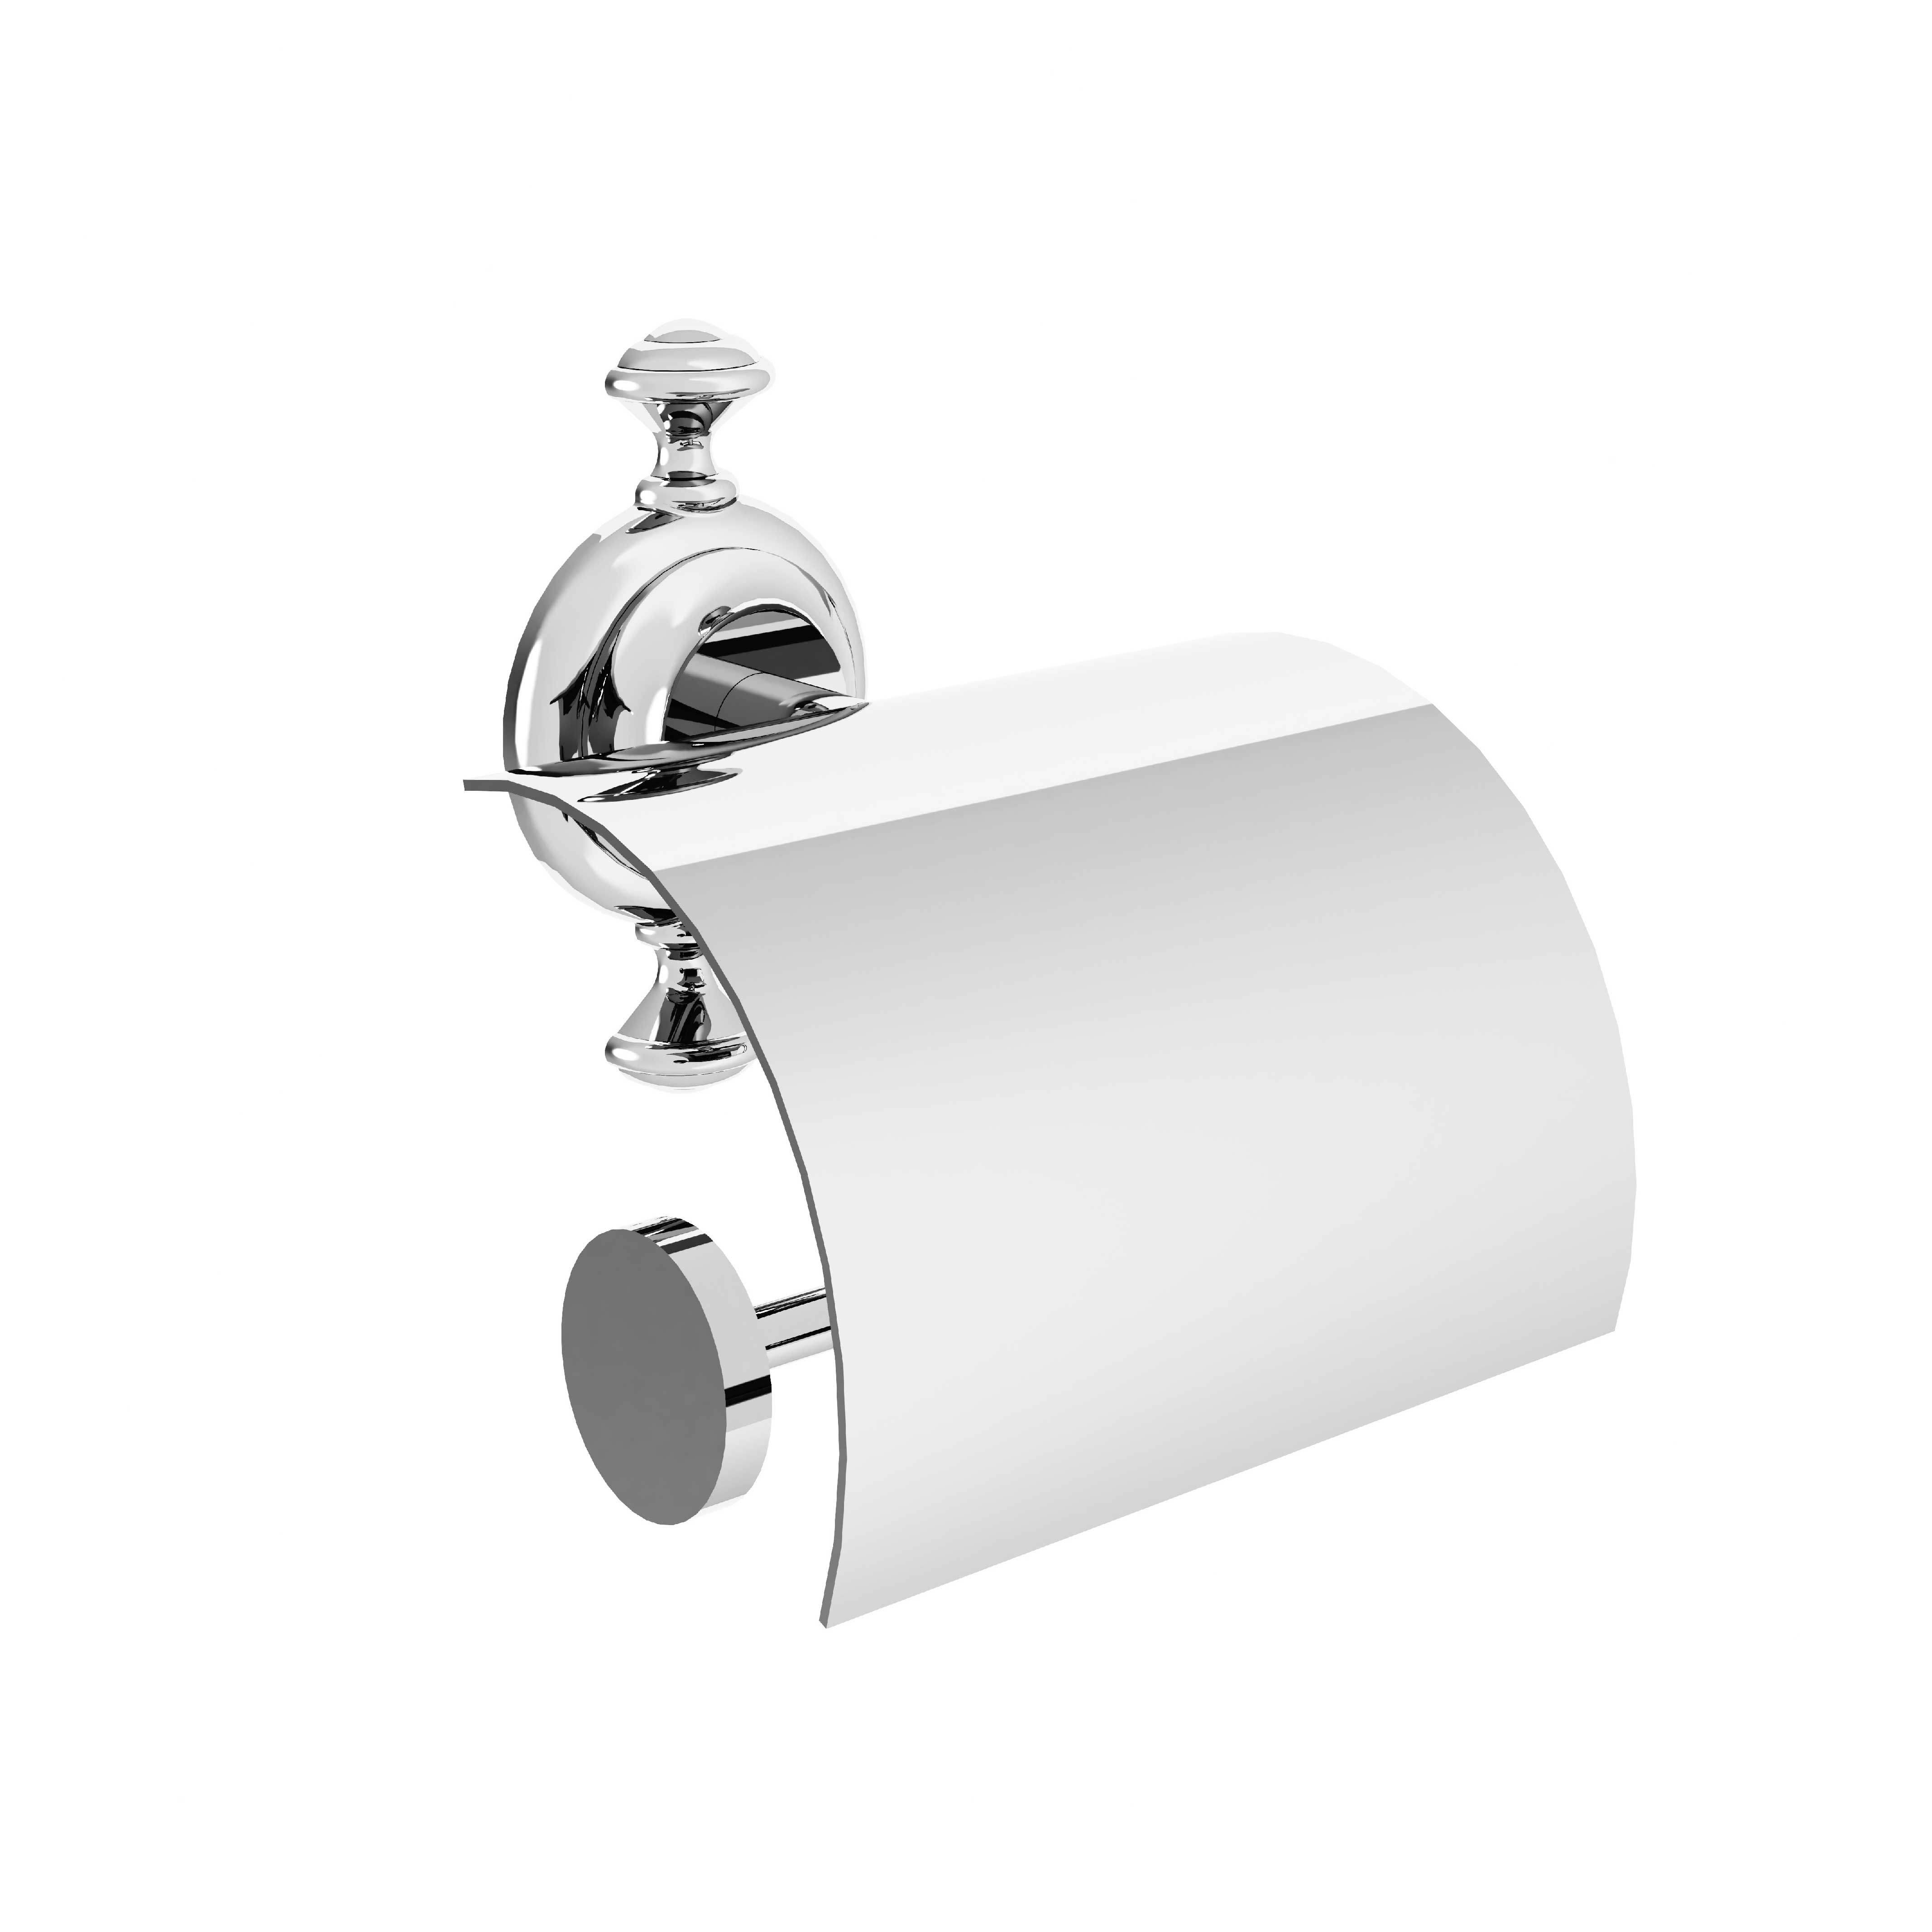 M01-503 Toilet roll holder with cover